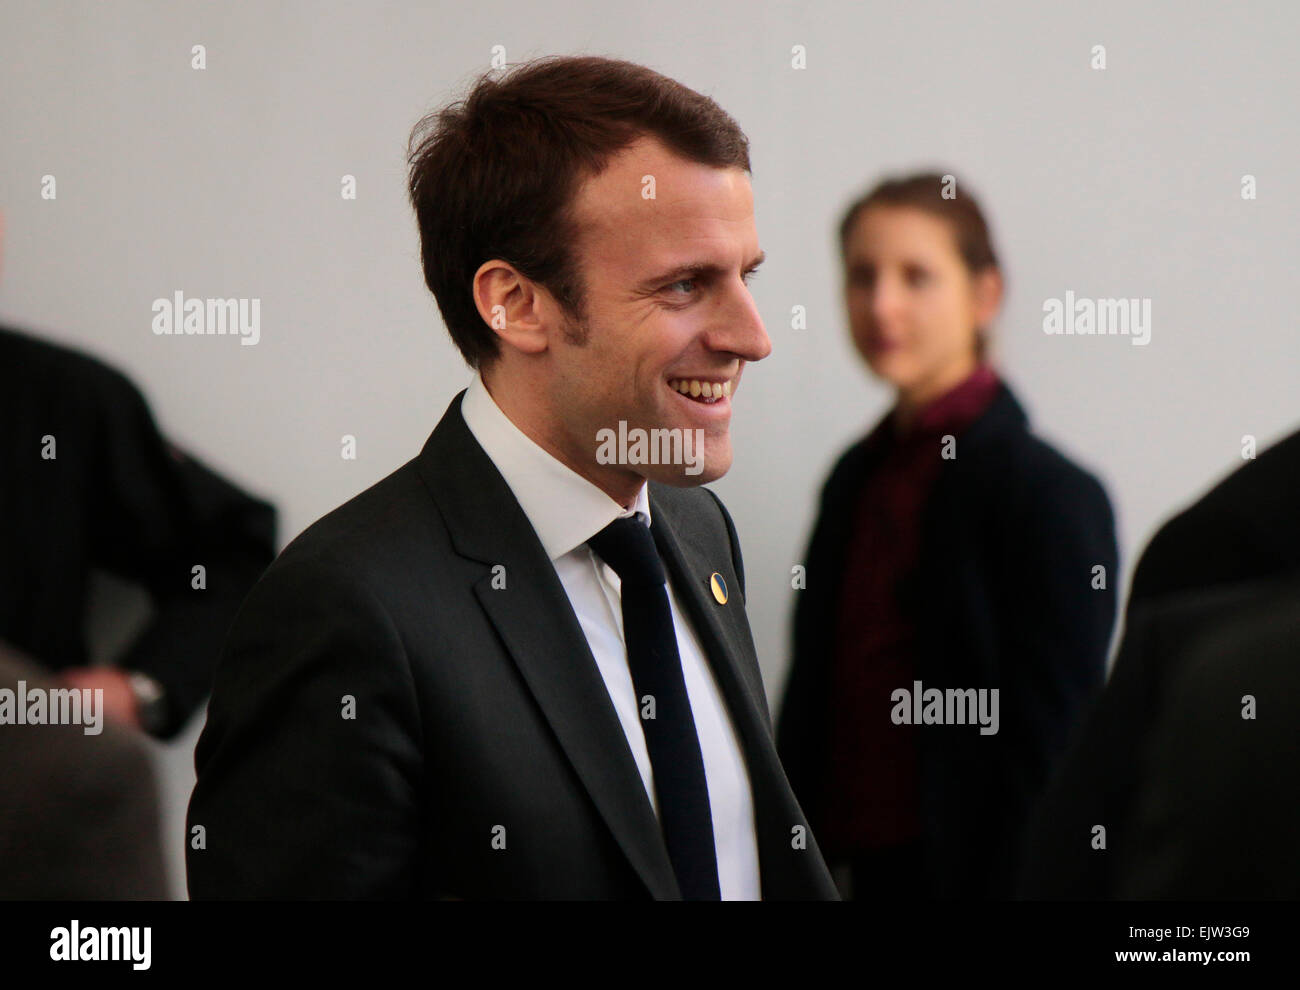 MARCH 31, 2015 - BERLIN: Emmanuel Macron at a photo opp before a meeting of the Ger Stock Photo